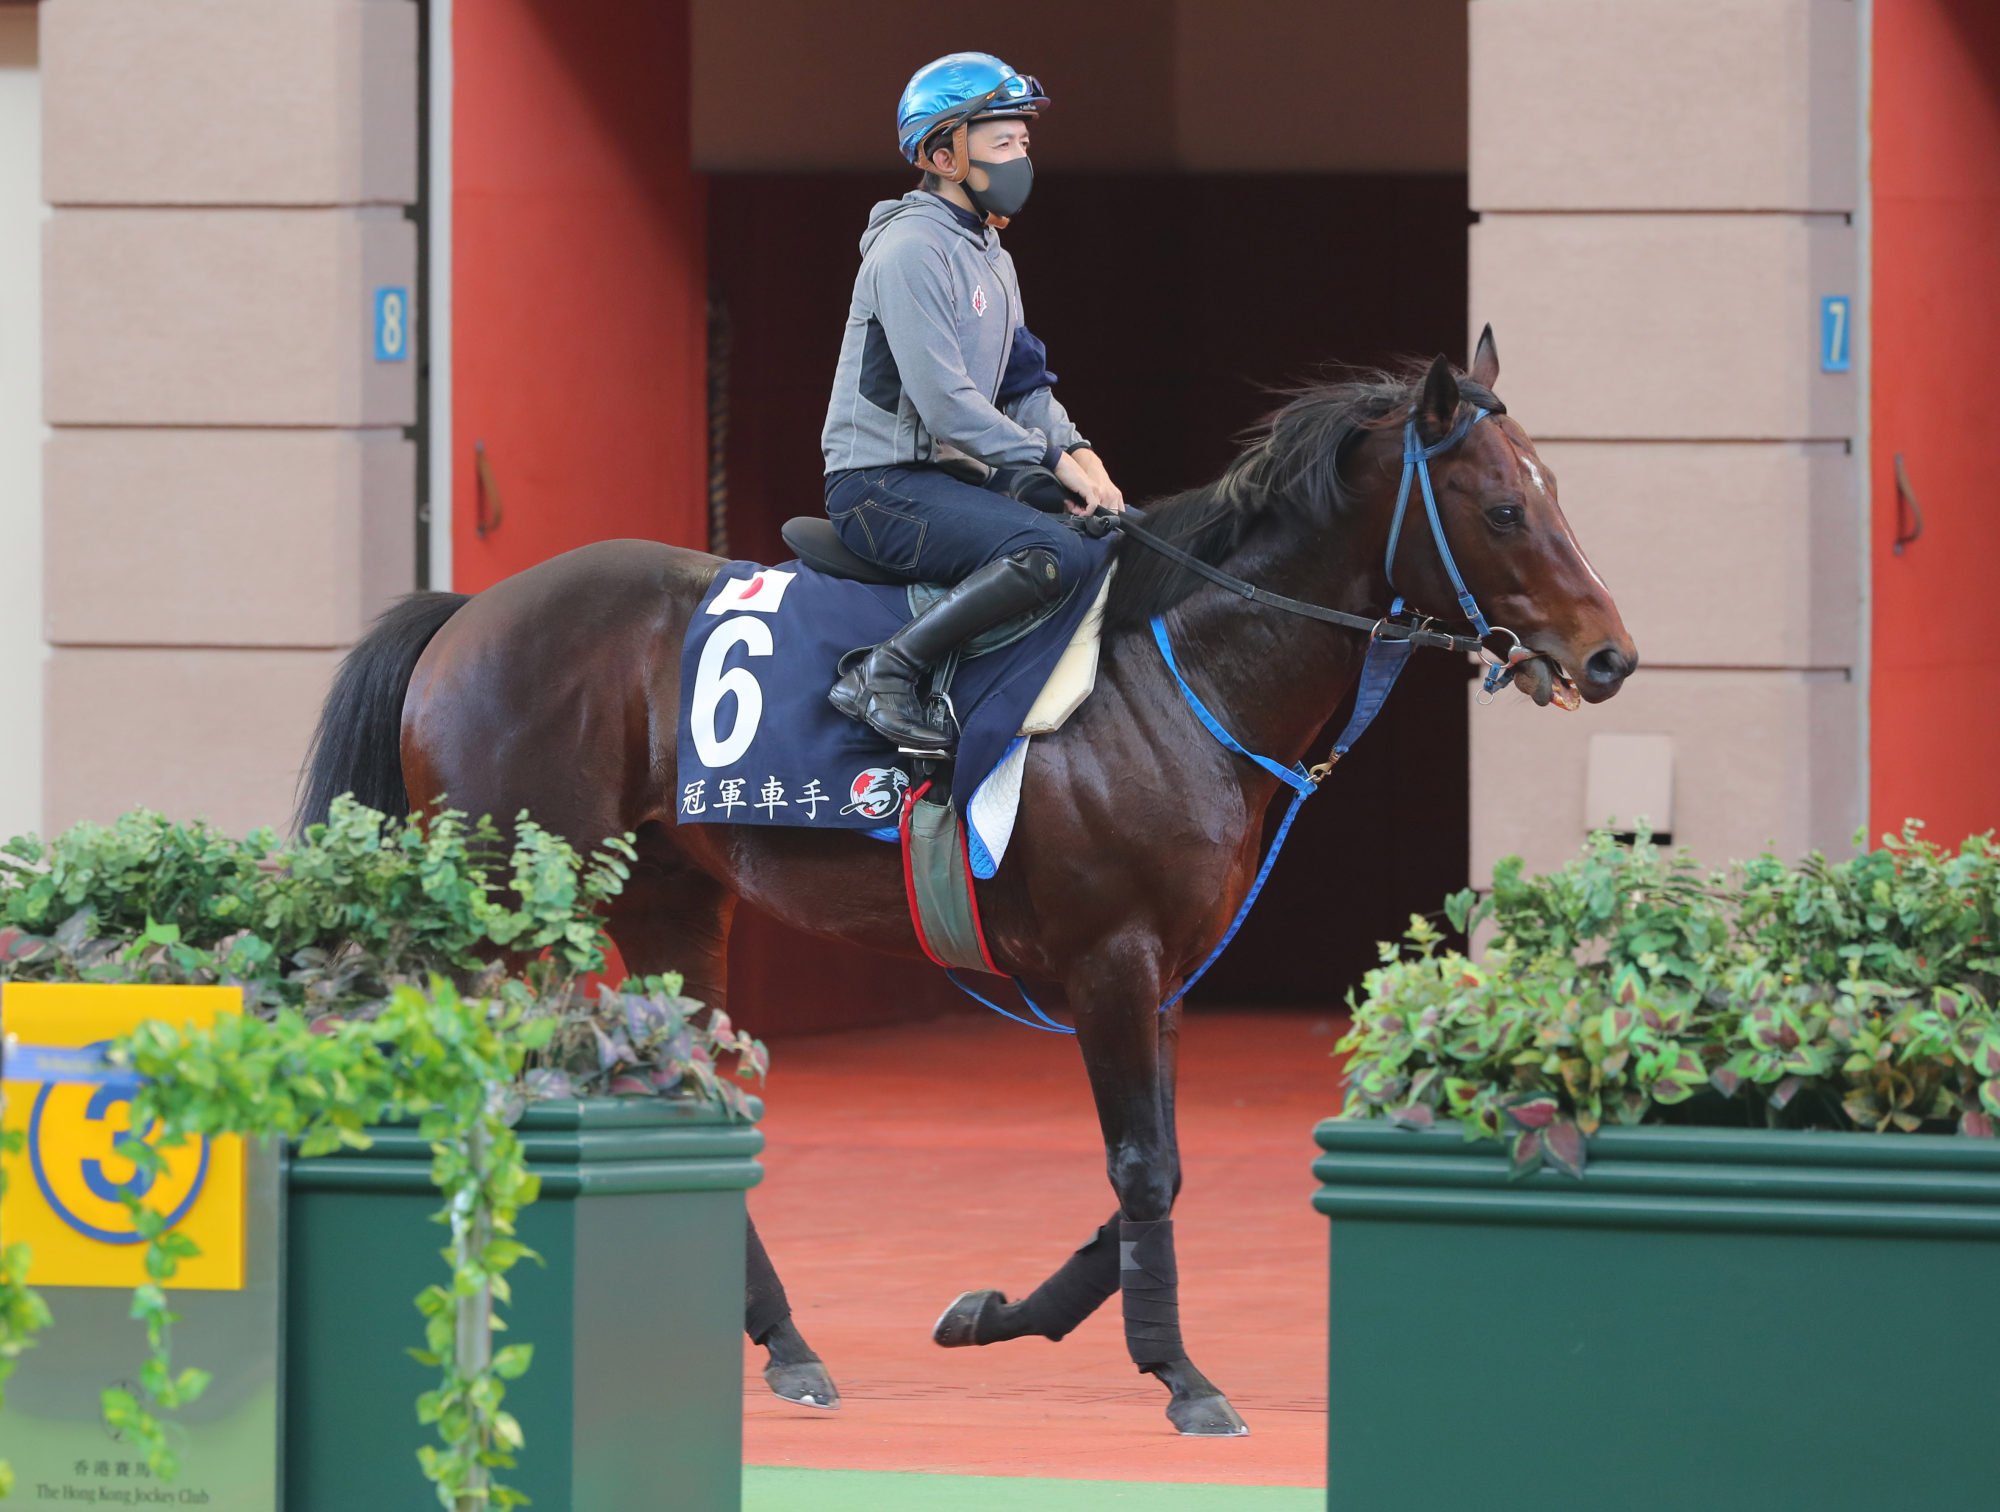 Yuichi Fukunaga aboard Indy Champ in the lead-up to last week’s Hong Kong International Races.